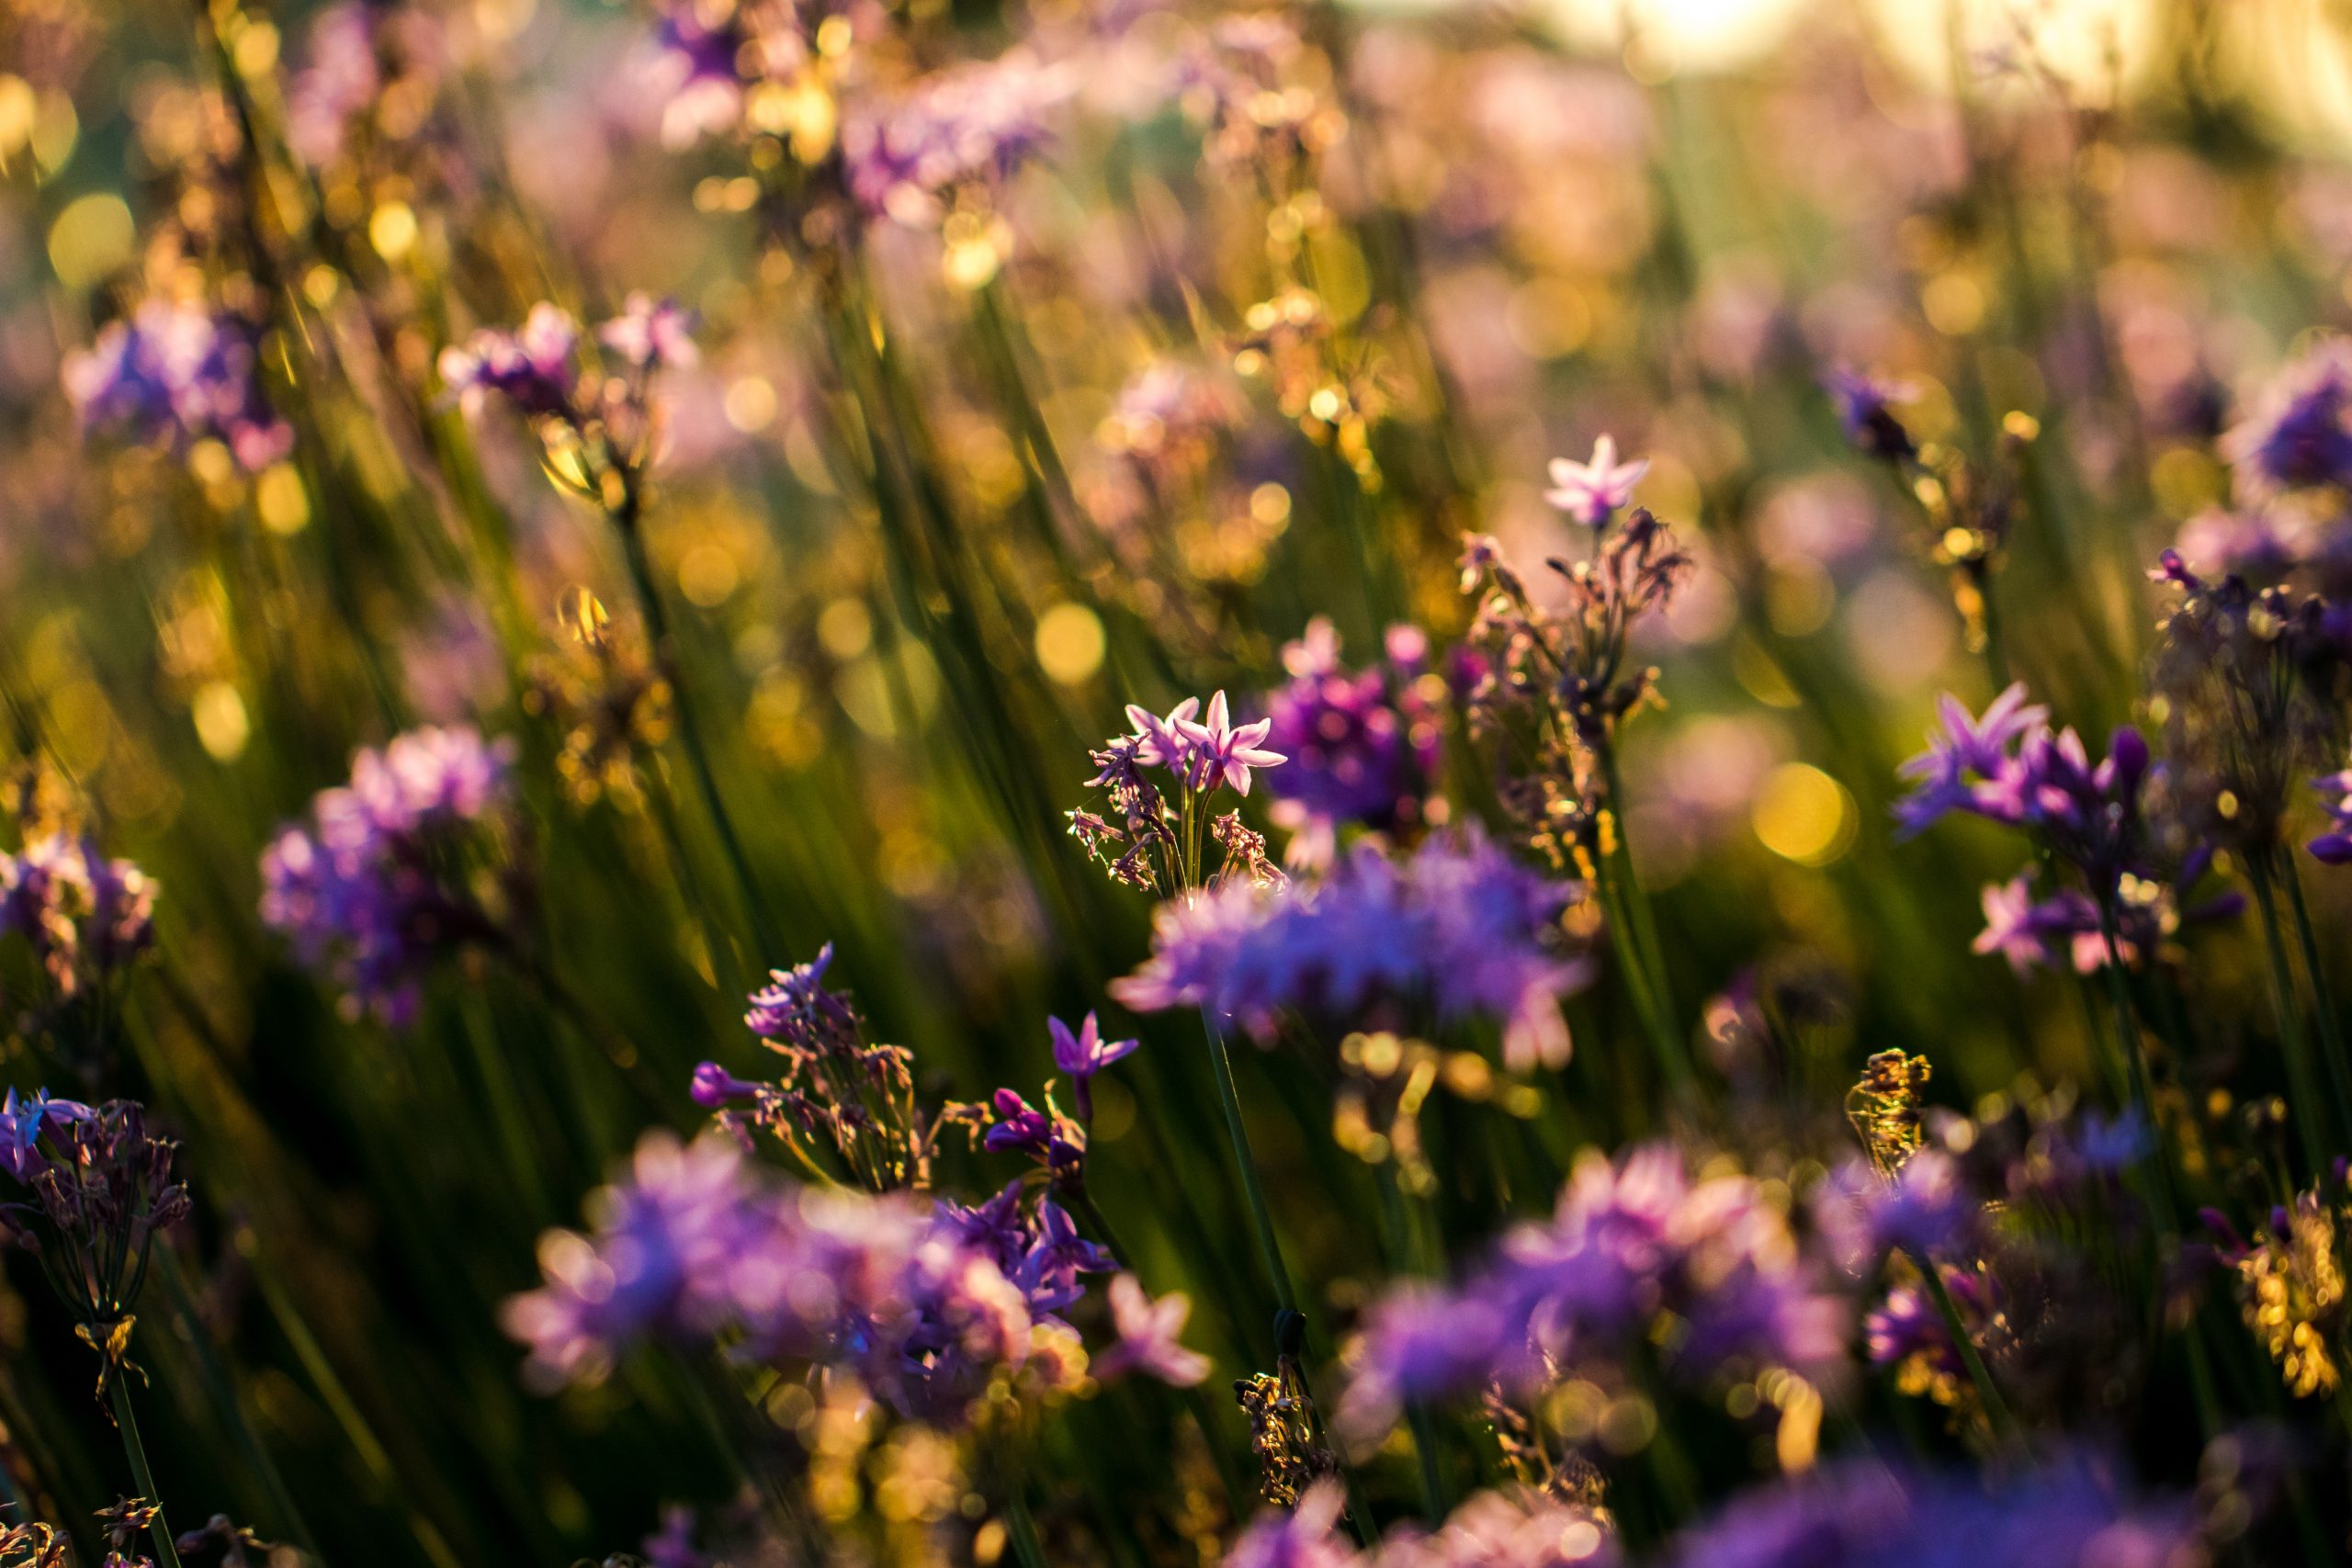 A close-up photograph of bright purple wildflowers growing in a field. The rising sun bathes the patch of flowers, giving them a golden glow.